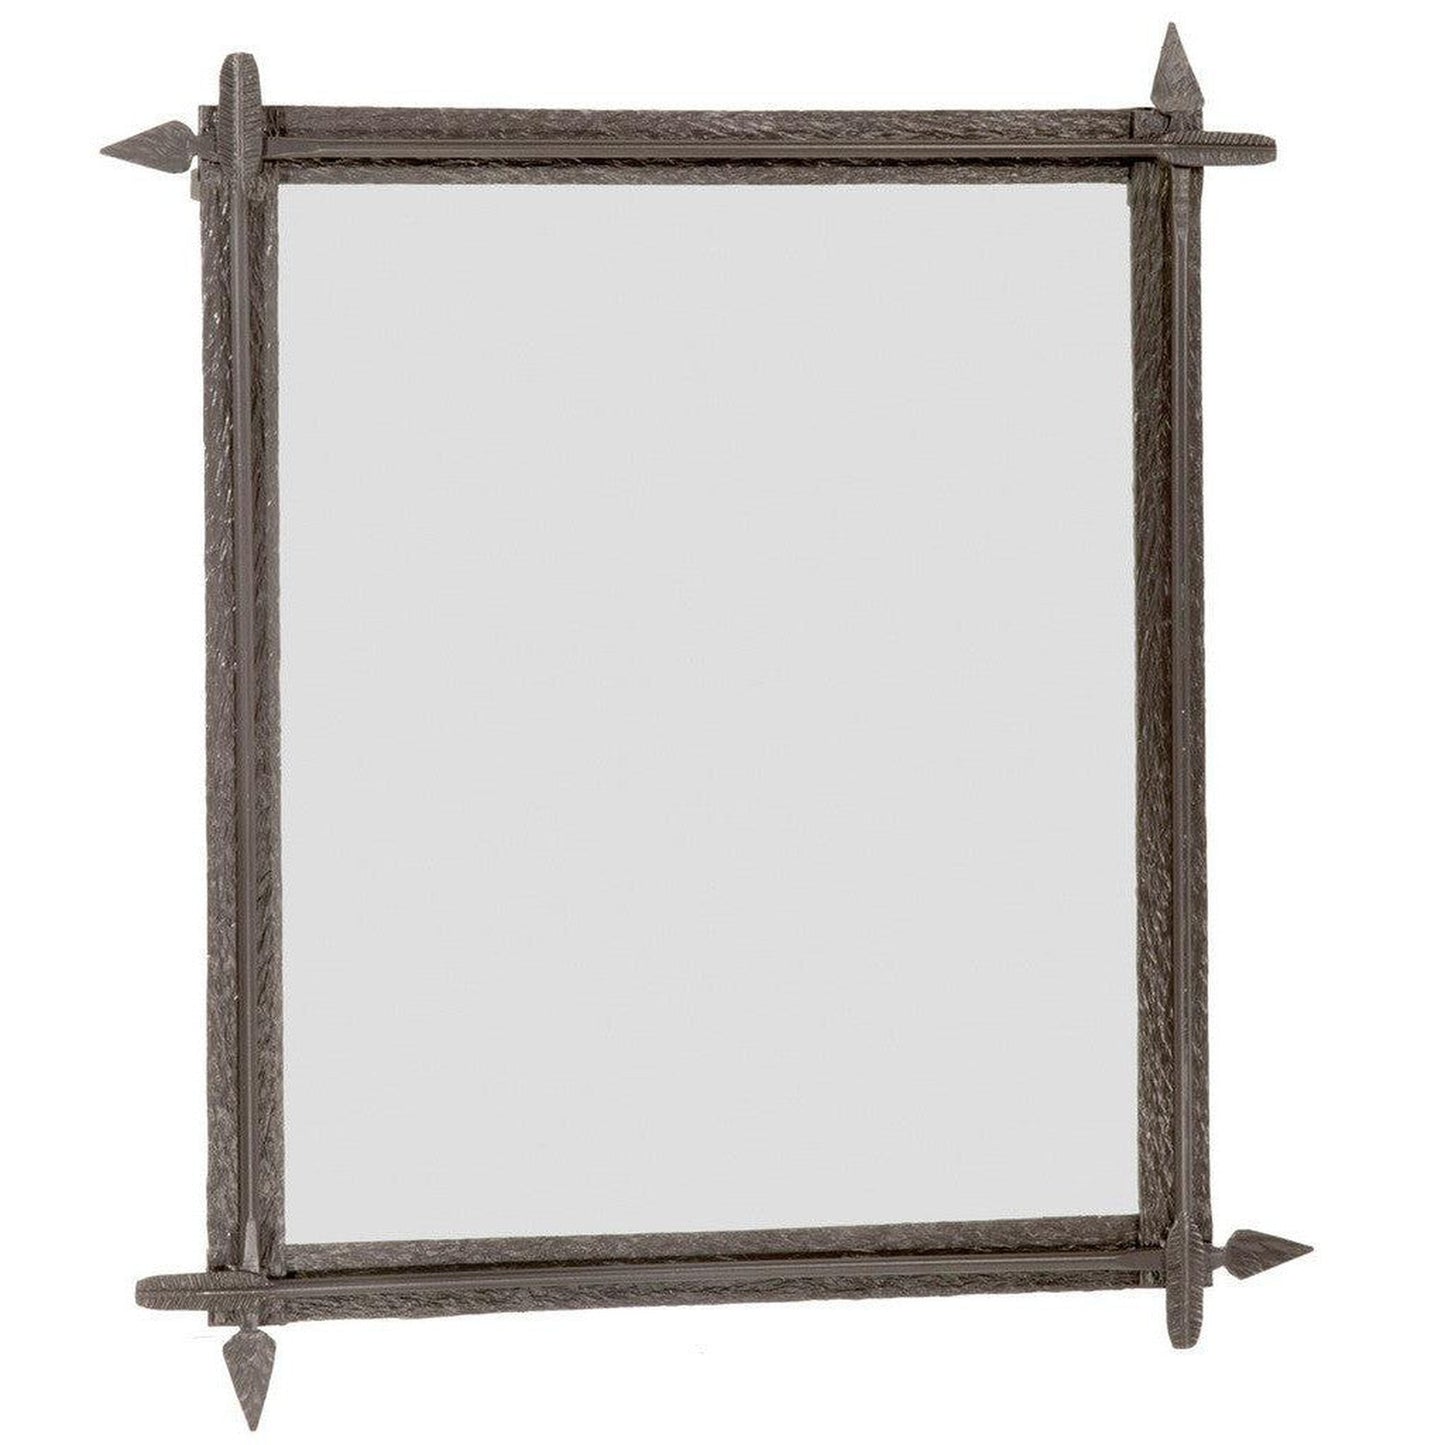 Stone County Ironworks Quapaw 31" x 43" Large Chalk White Iron Wall Mirror With Gold Iron Accent